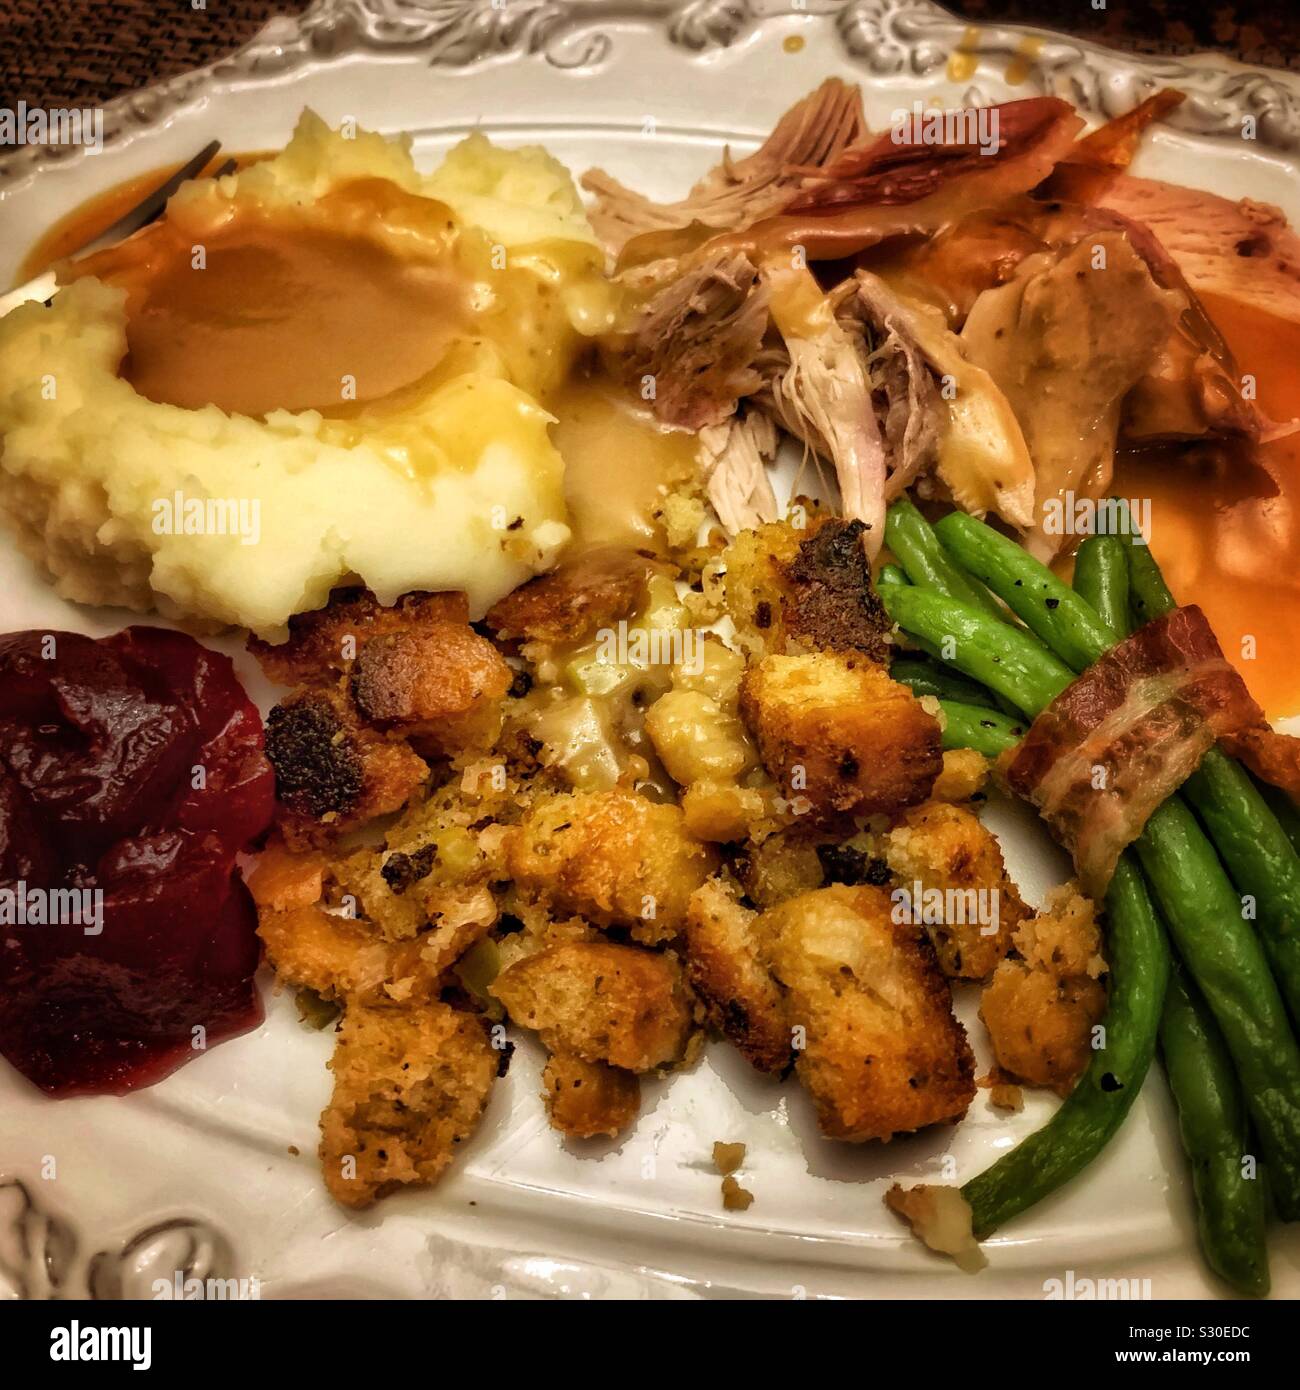 A Thanksgiving meal is plated featuring turkey, a bacon wrapped green bean bundle, dressing, cranberry sauce, and mashed potatoes with gravy. Stock Photo